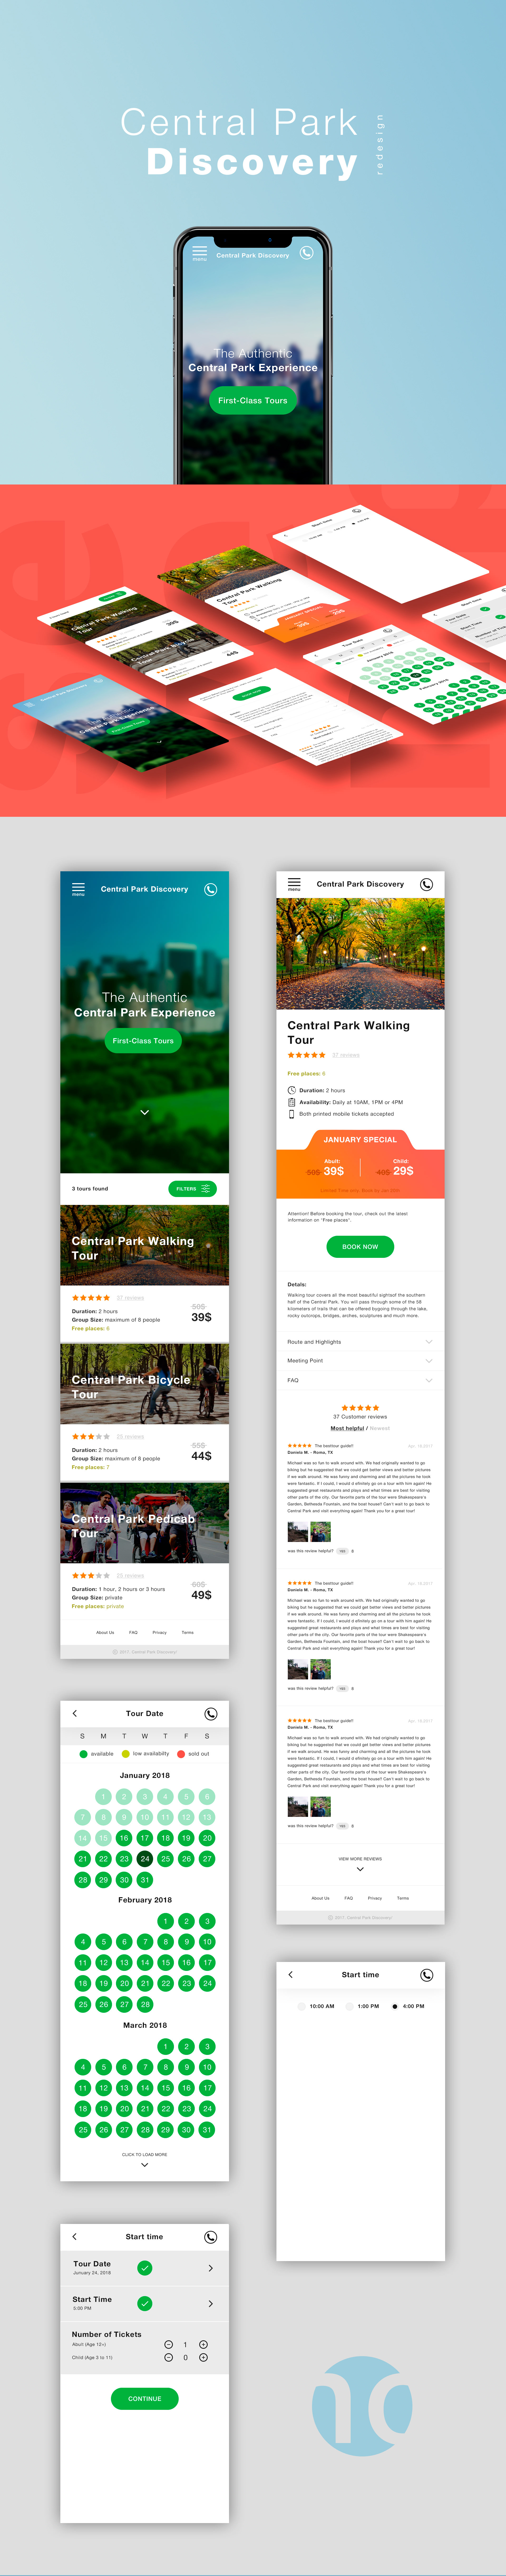 NY Central Park Discovery | Mobile app | Design 